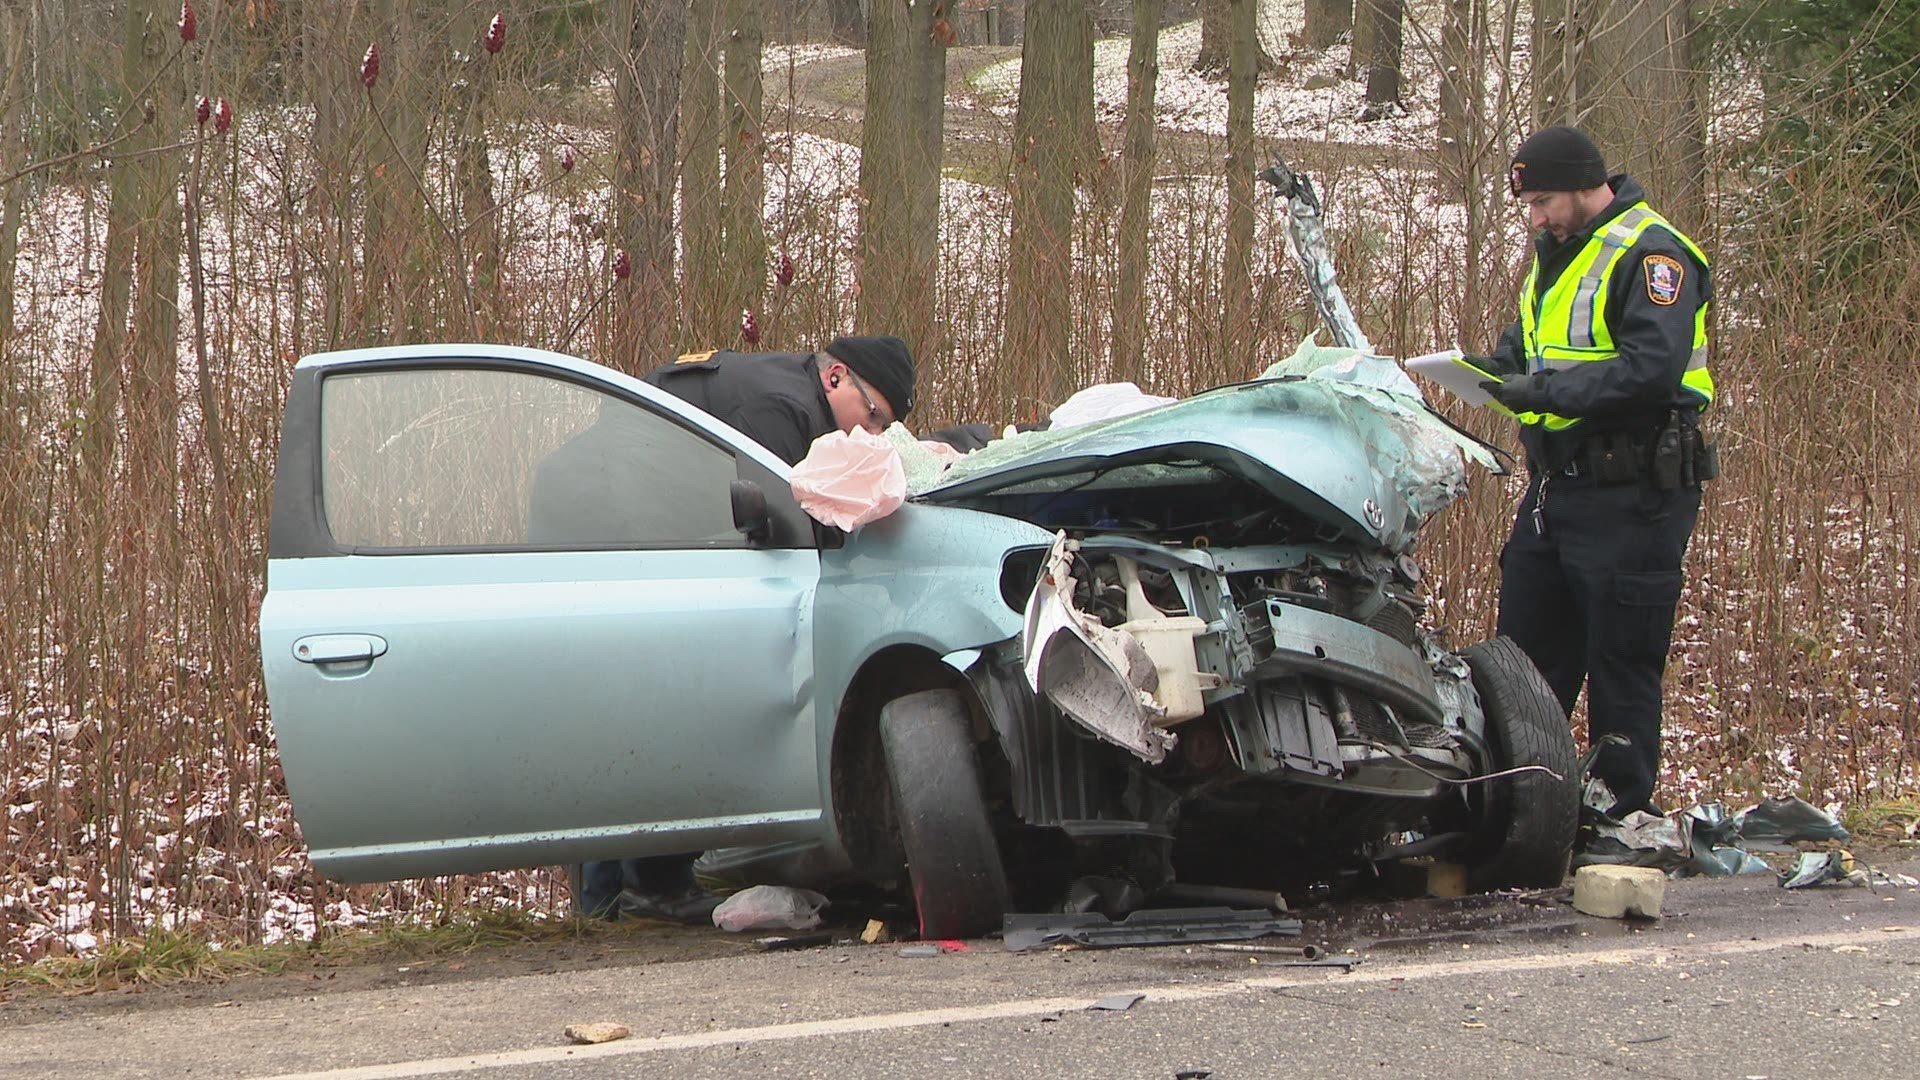 Streetsboro police say the head-on crash involved a 2009 Chevrolet Silverado and a 2001 Toyota Echo, which police say suffered "catastrophic damage."